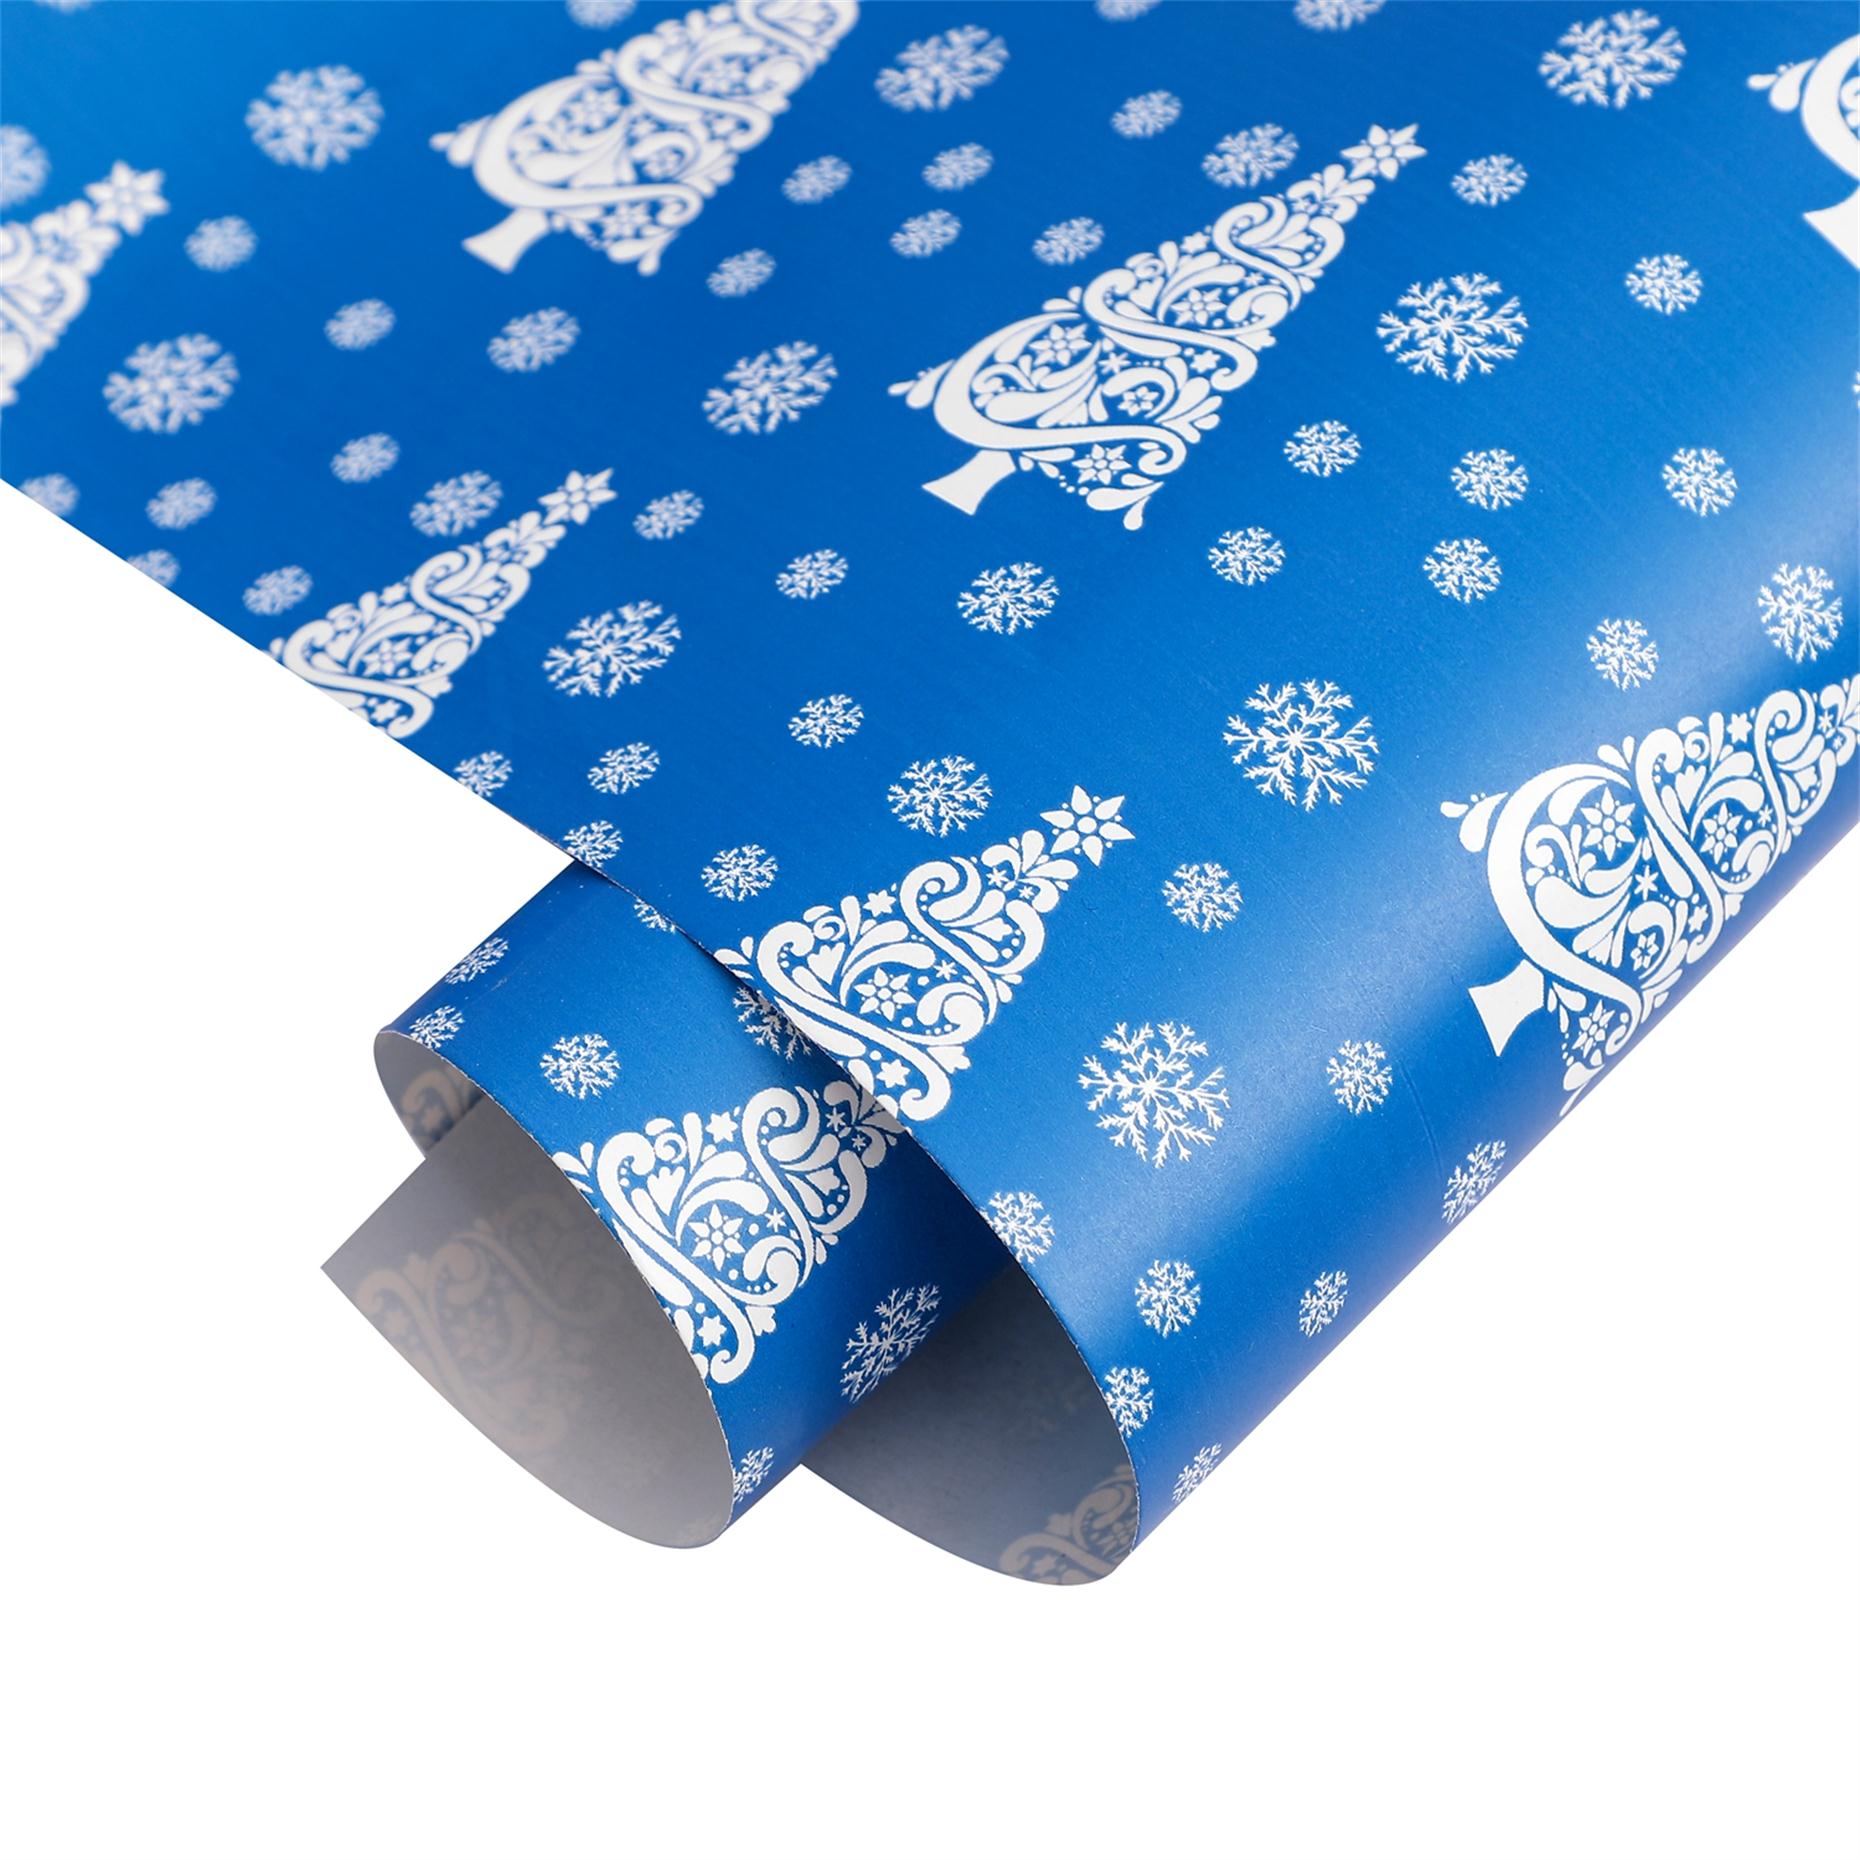 Jialan Package gift wrapping paper manufacturer cost for birthday gifts-2